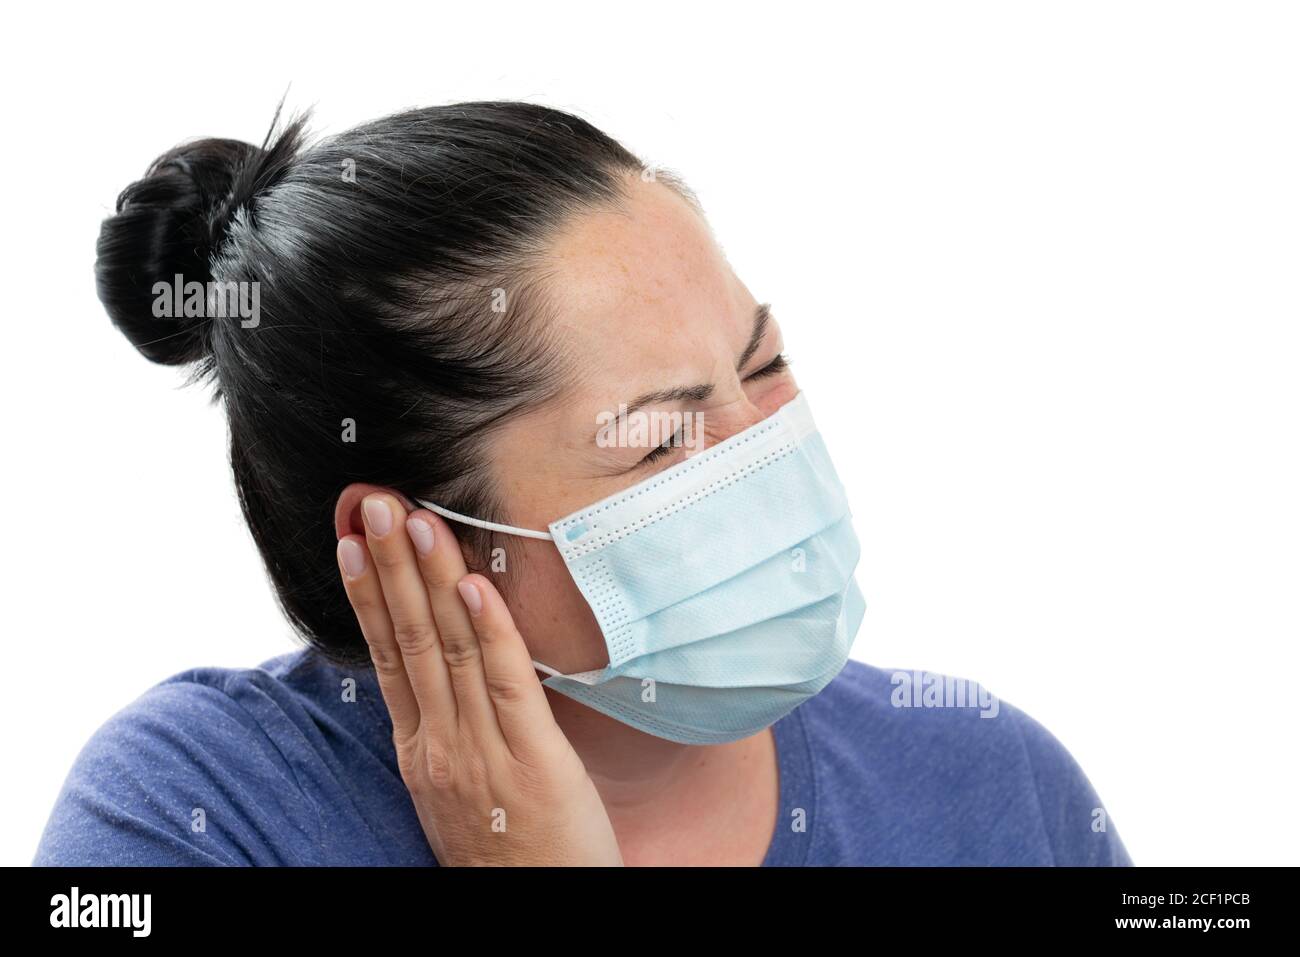 Adult female model touching ear with hand as pain covid19 influenza flu symptom concept wearing surgical disposable mask to protect from contamination Stock Photo